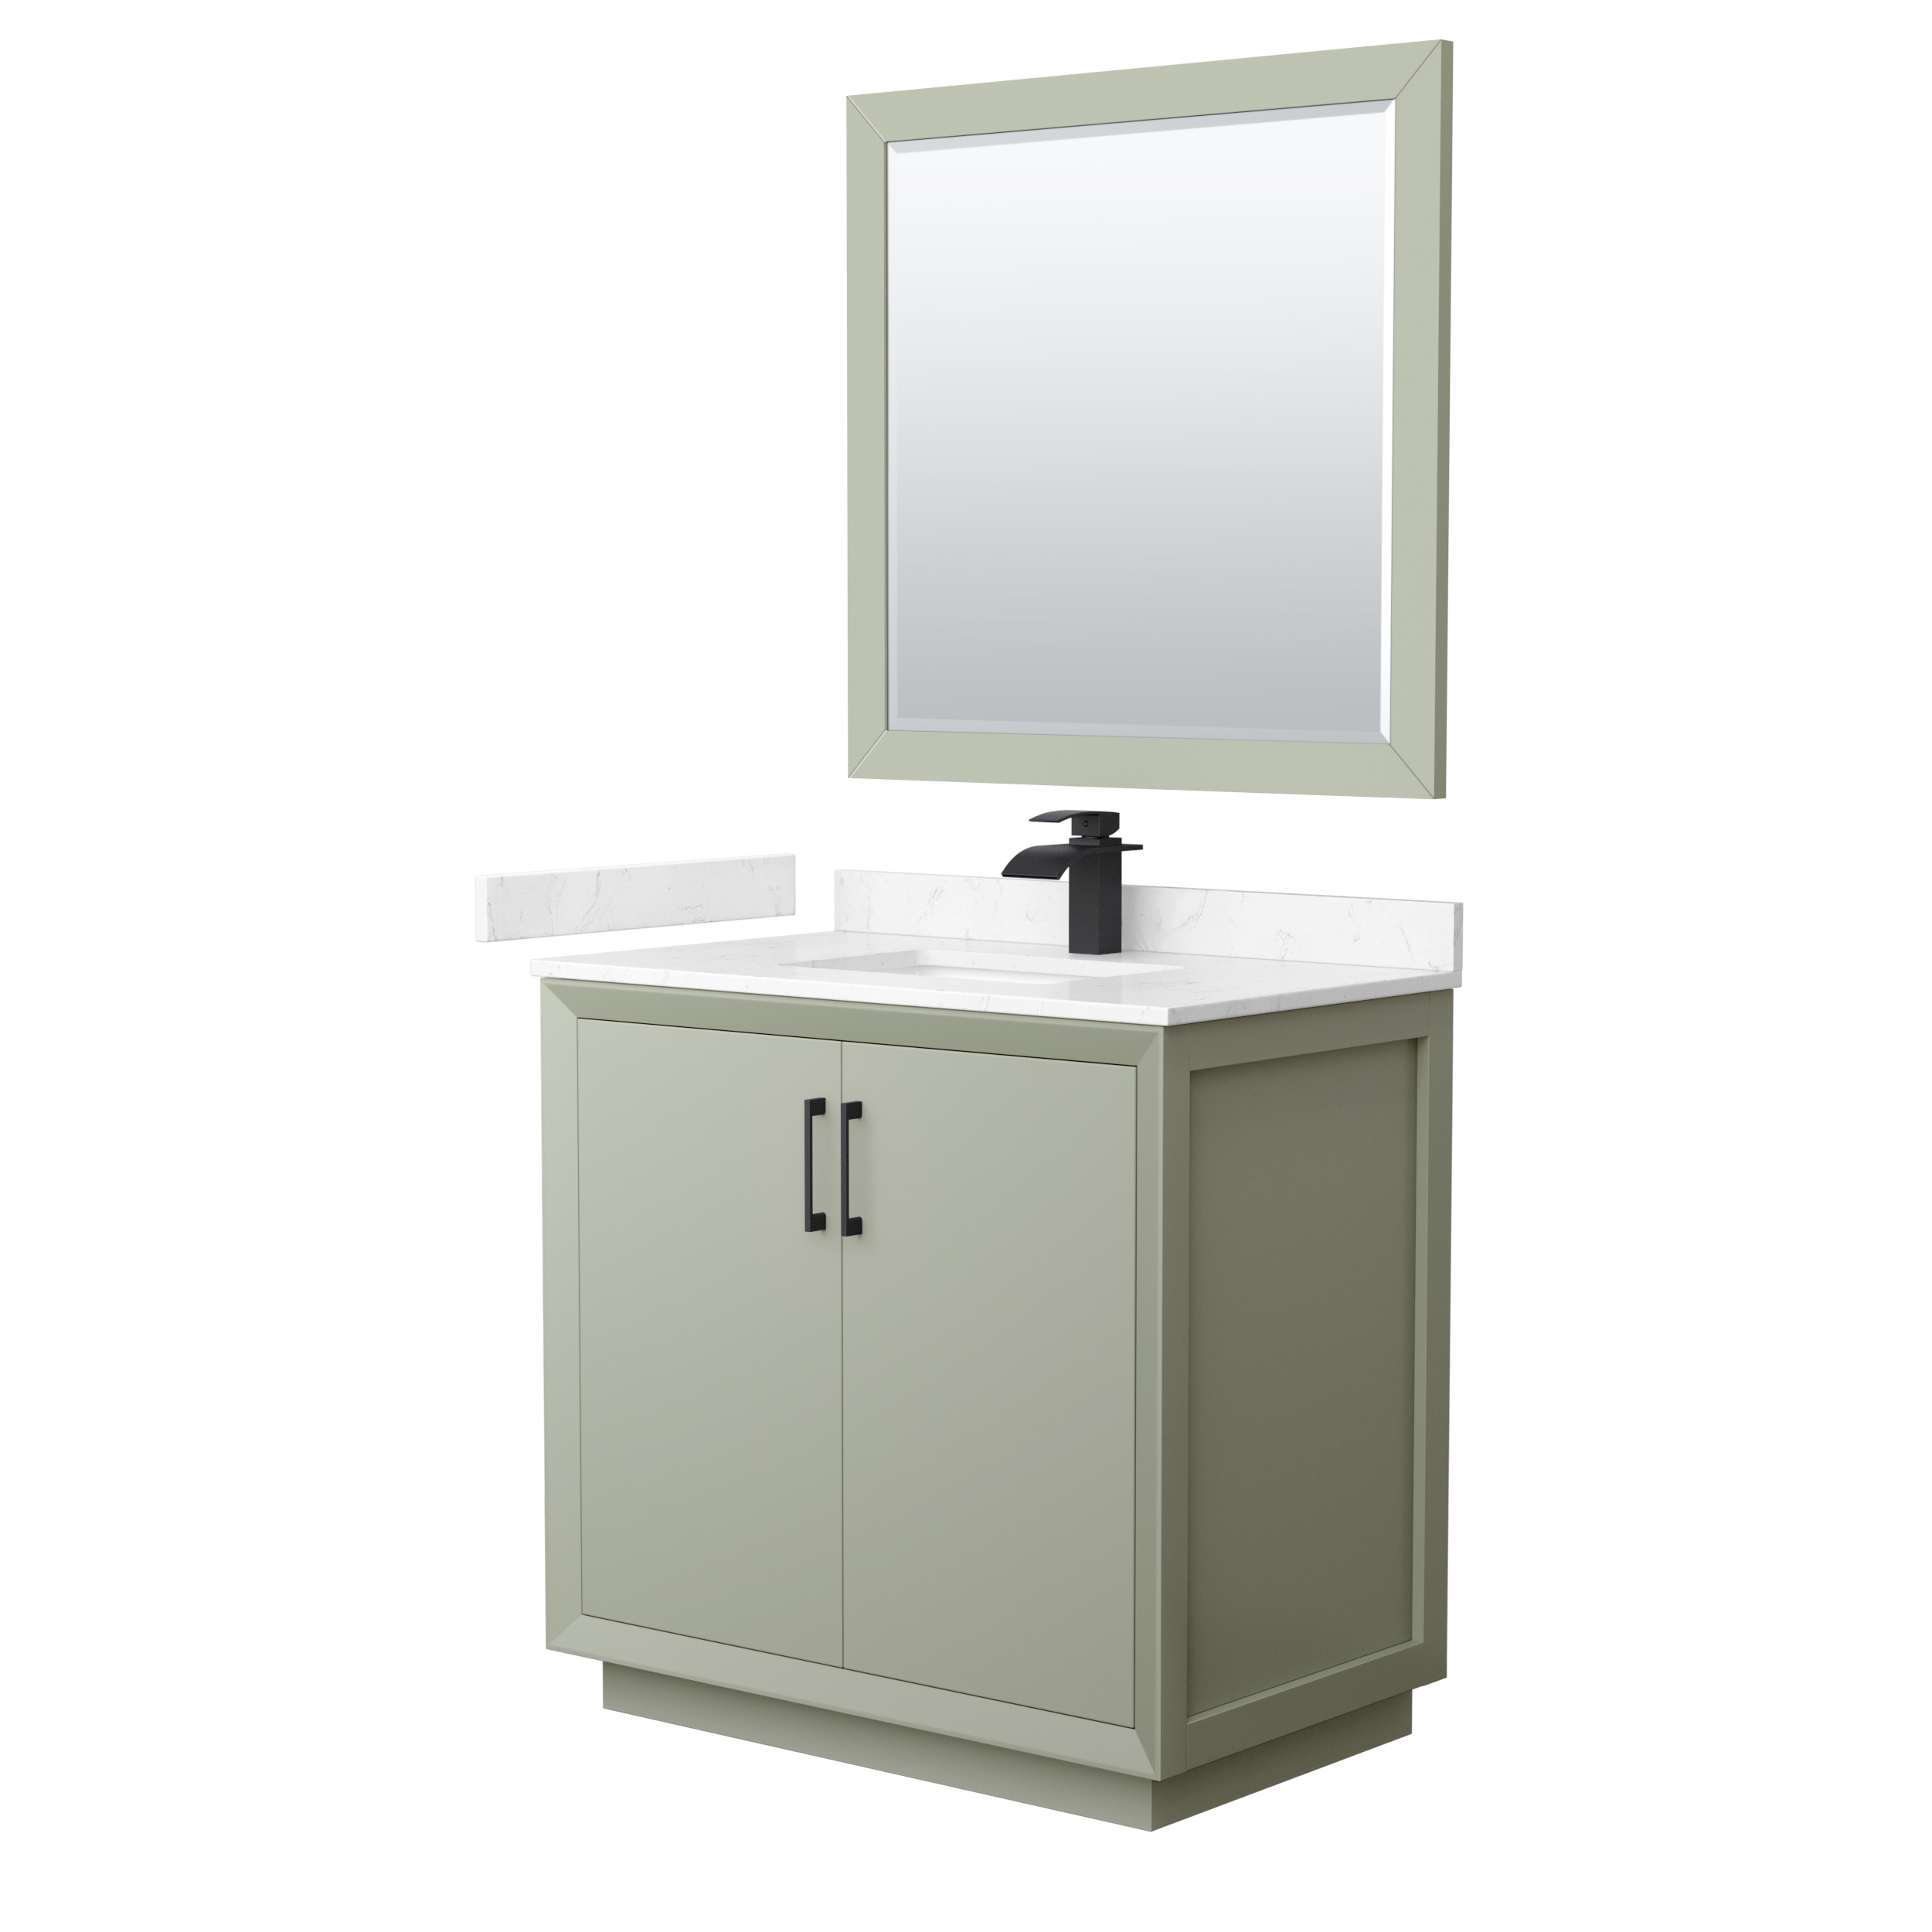 Strada 36" Single Vanity with optional Cultured Marble Counter - Light Green WC-4141-36-SGL-VAN-LGN-